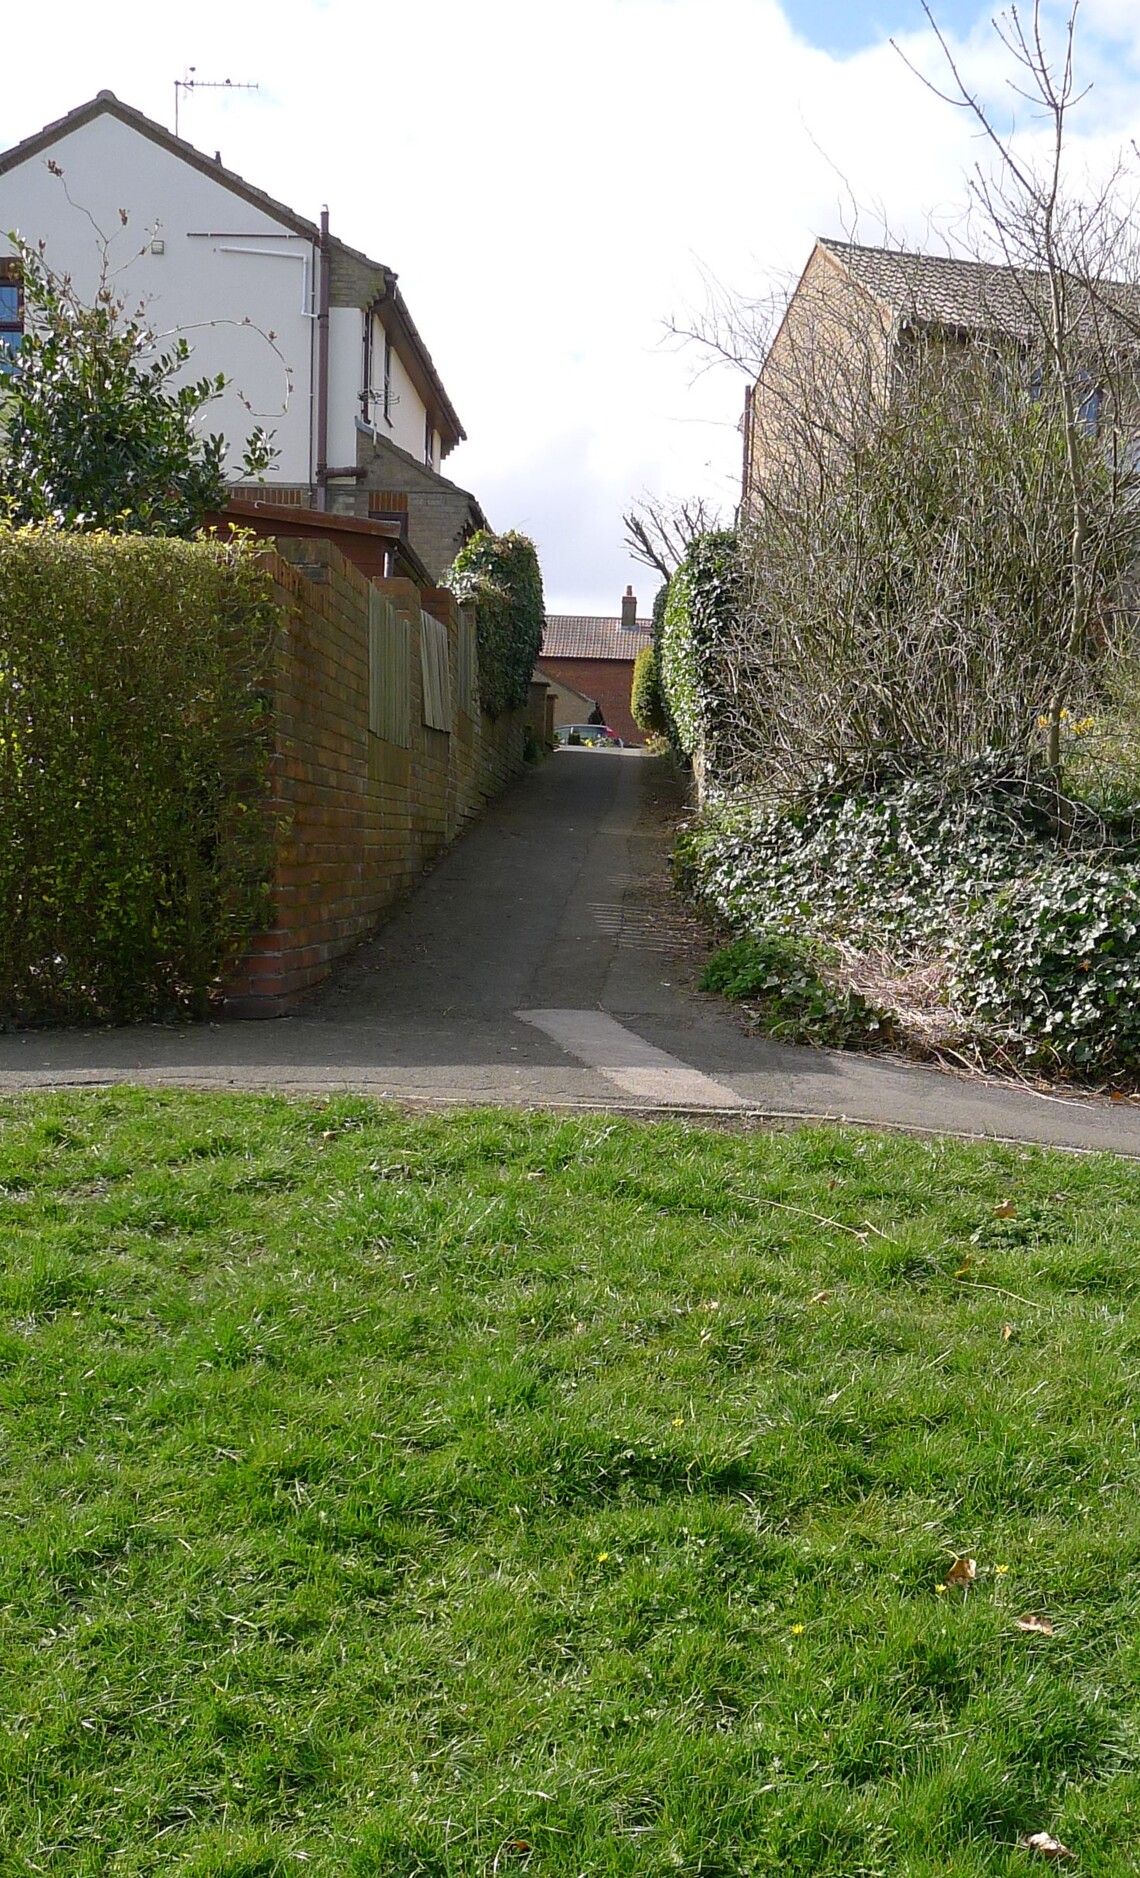 Footpath, Sheepdyke Lane to Cecil Road in Hunmanby